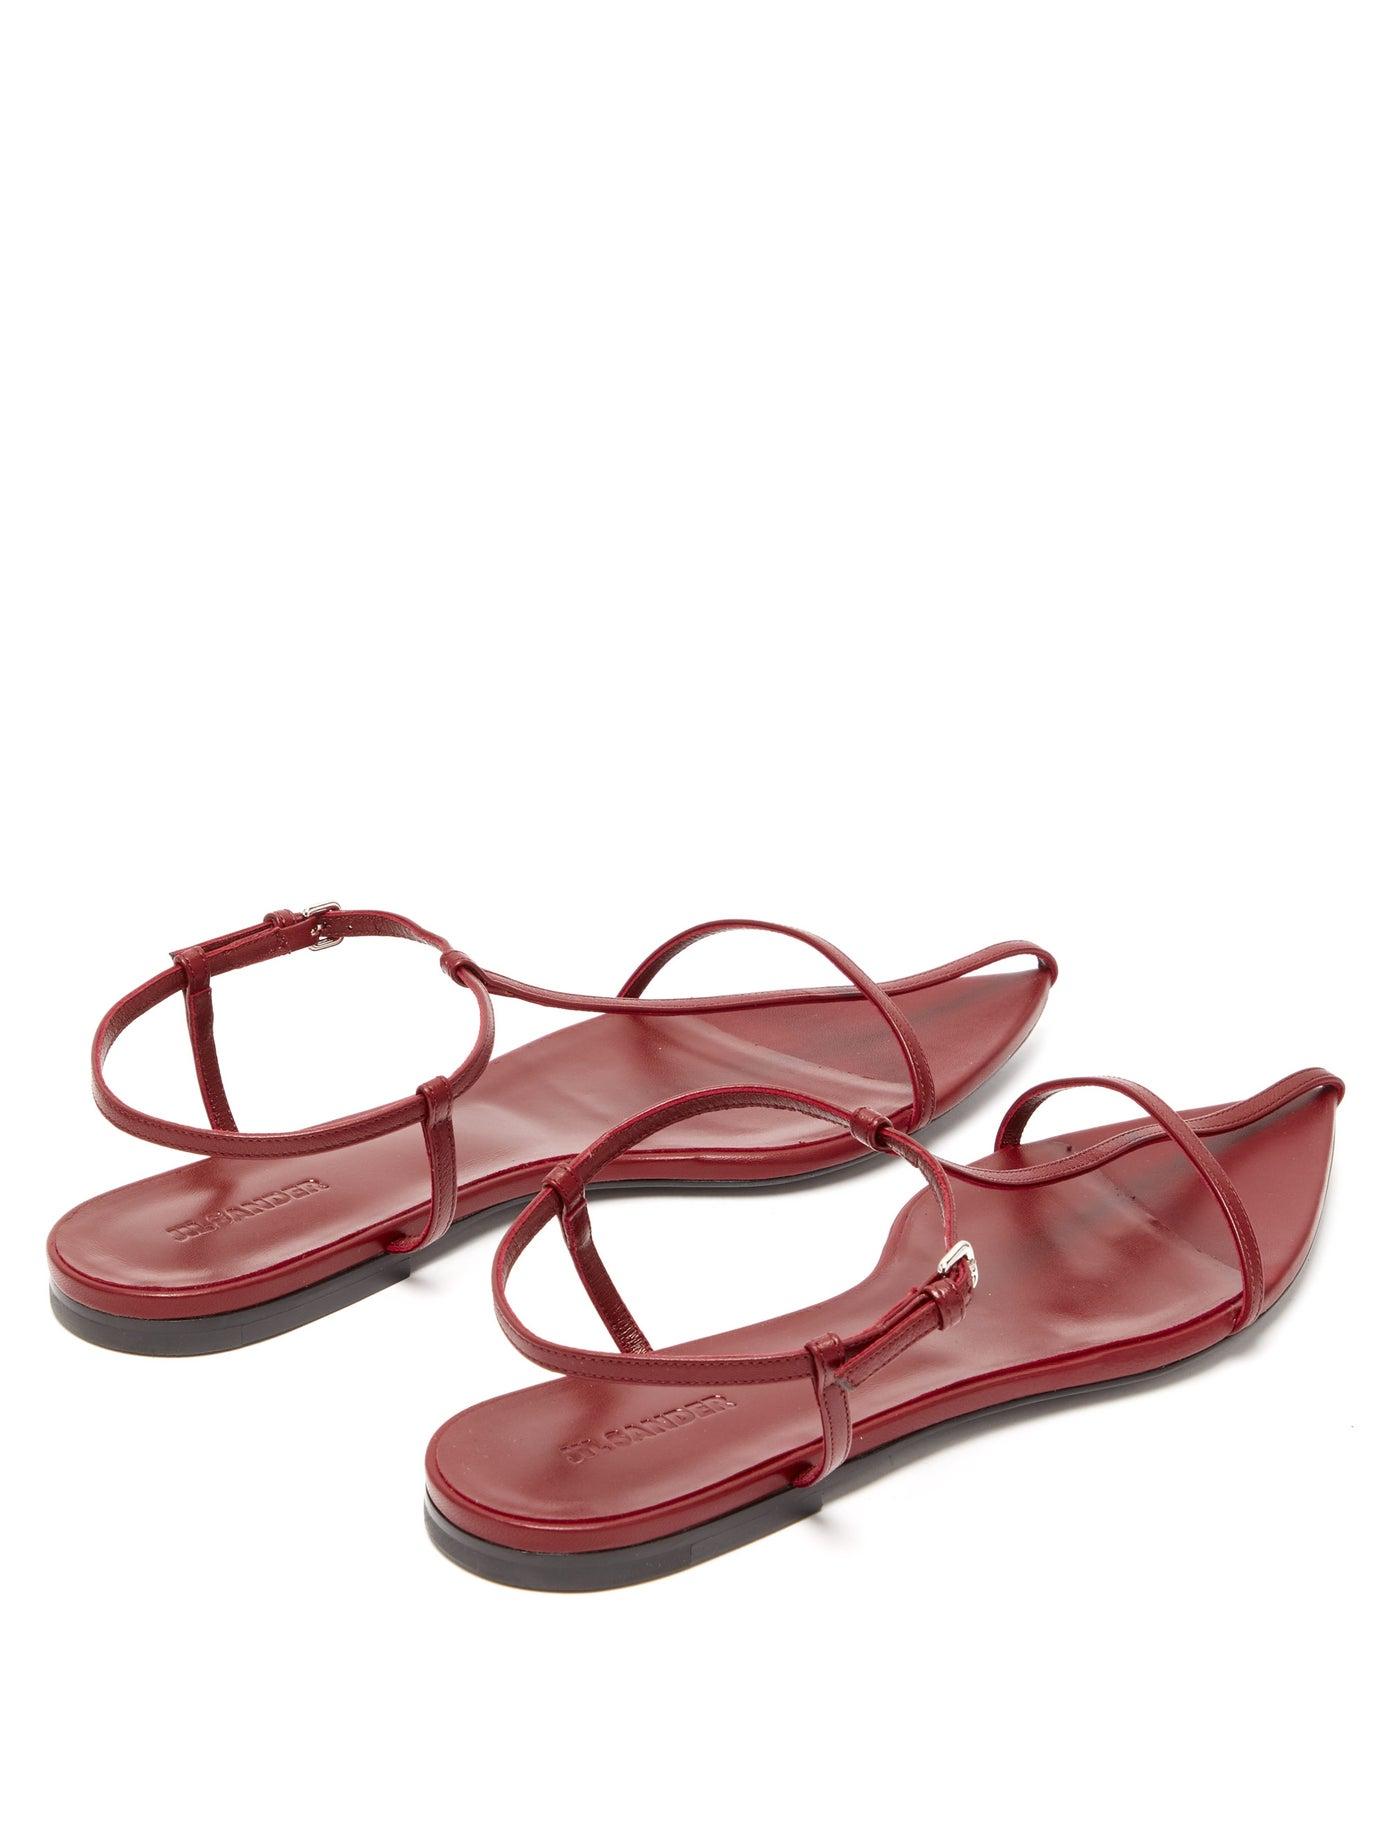 Jil Sander T-strap Point-toe Leather Sandals in Red - Lyst